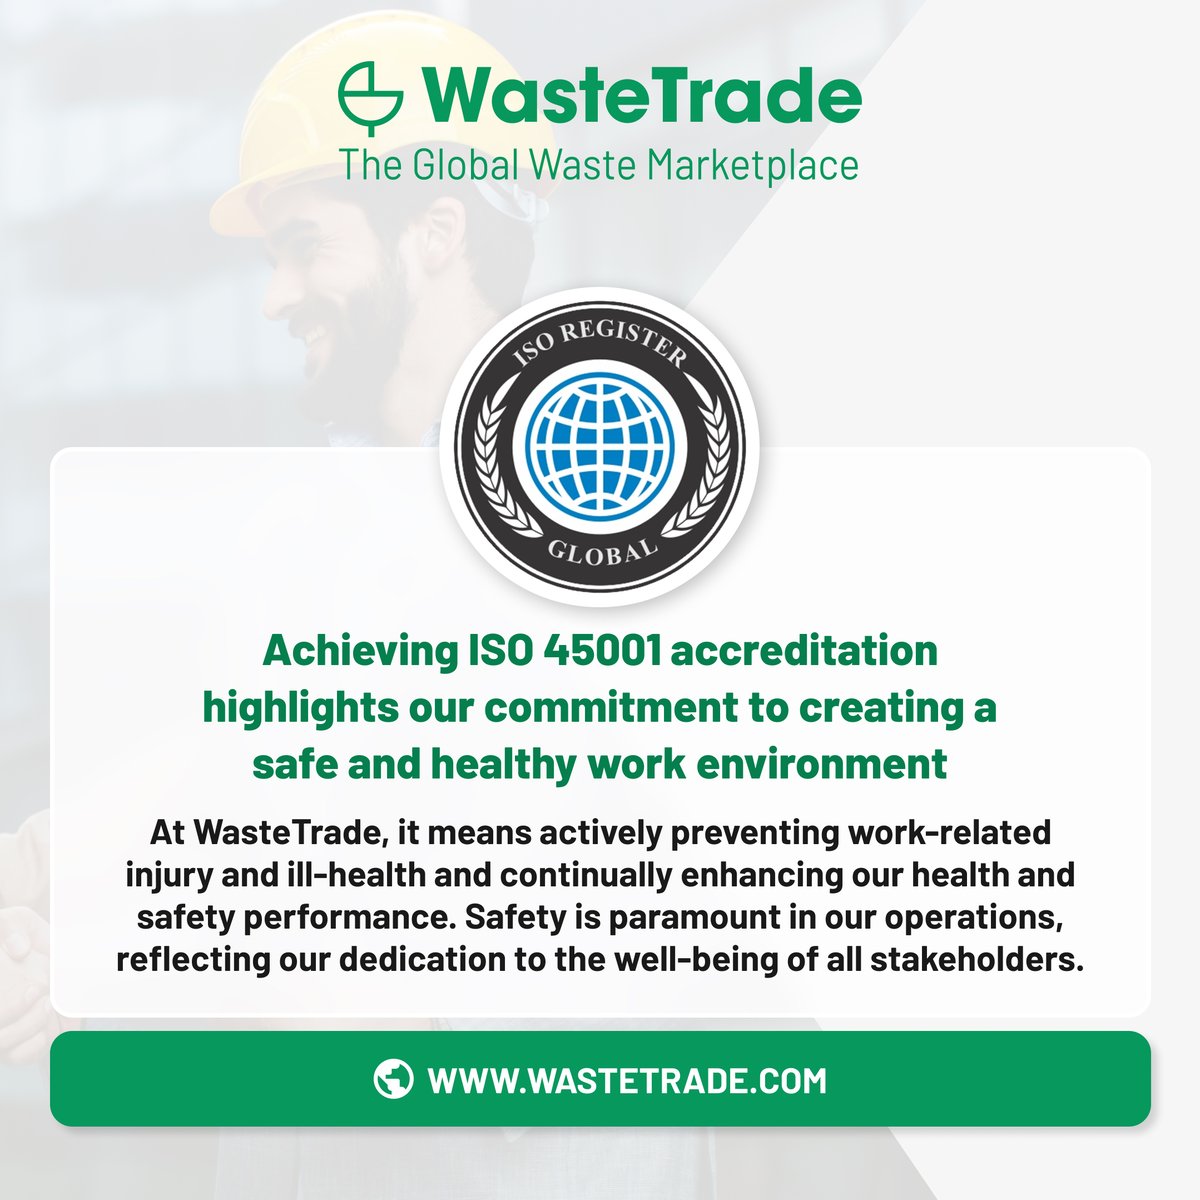 WasteTrade’s alignment with ISO 45001 showcases our deep-seated commitment to ensuring a safer, healthier workplace.

Web: shorturl.at/bsPUY

#waste #recycling #wastemanagement #circulareconomy #plasticrecycling #ISO #ISO45001 #ISOAccredited #ISOAccreditation